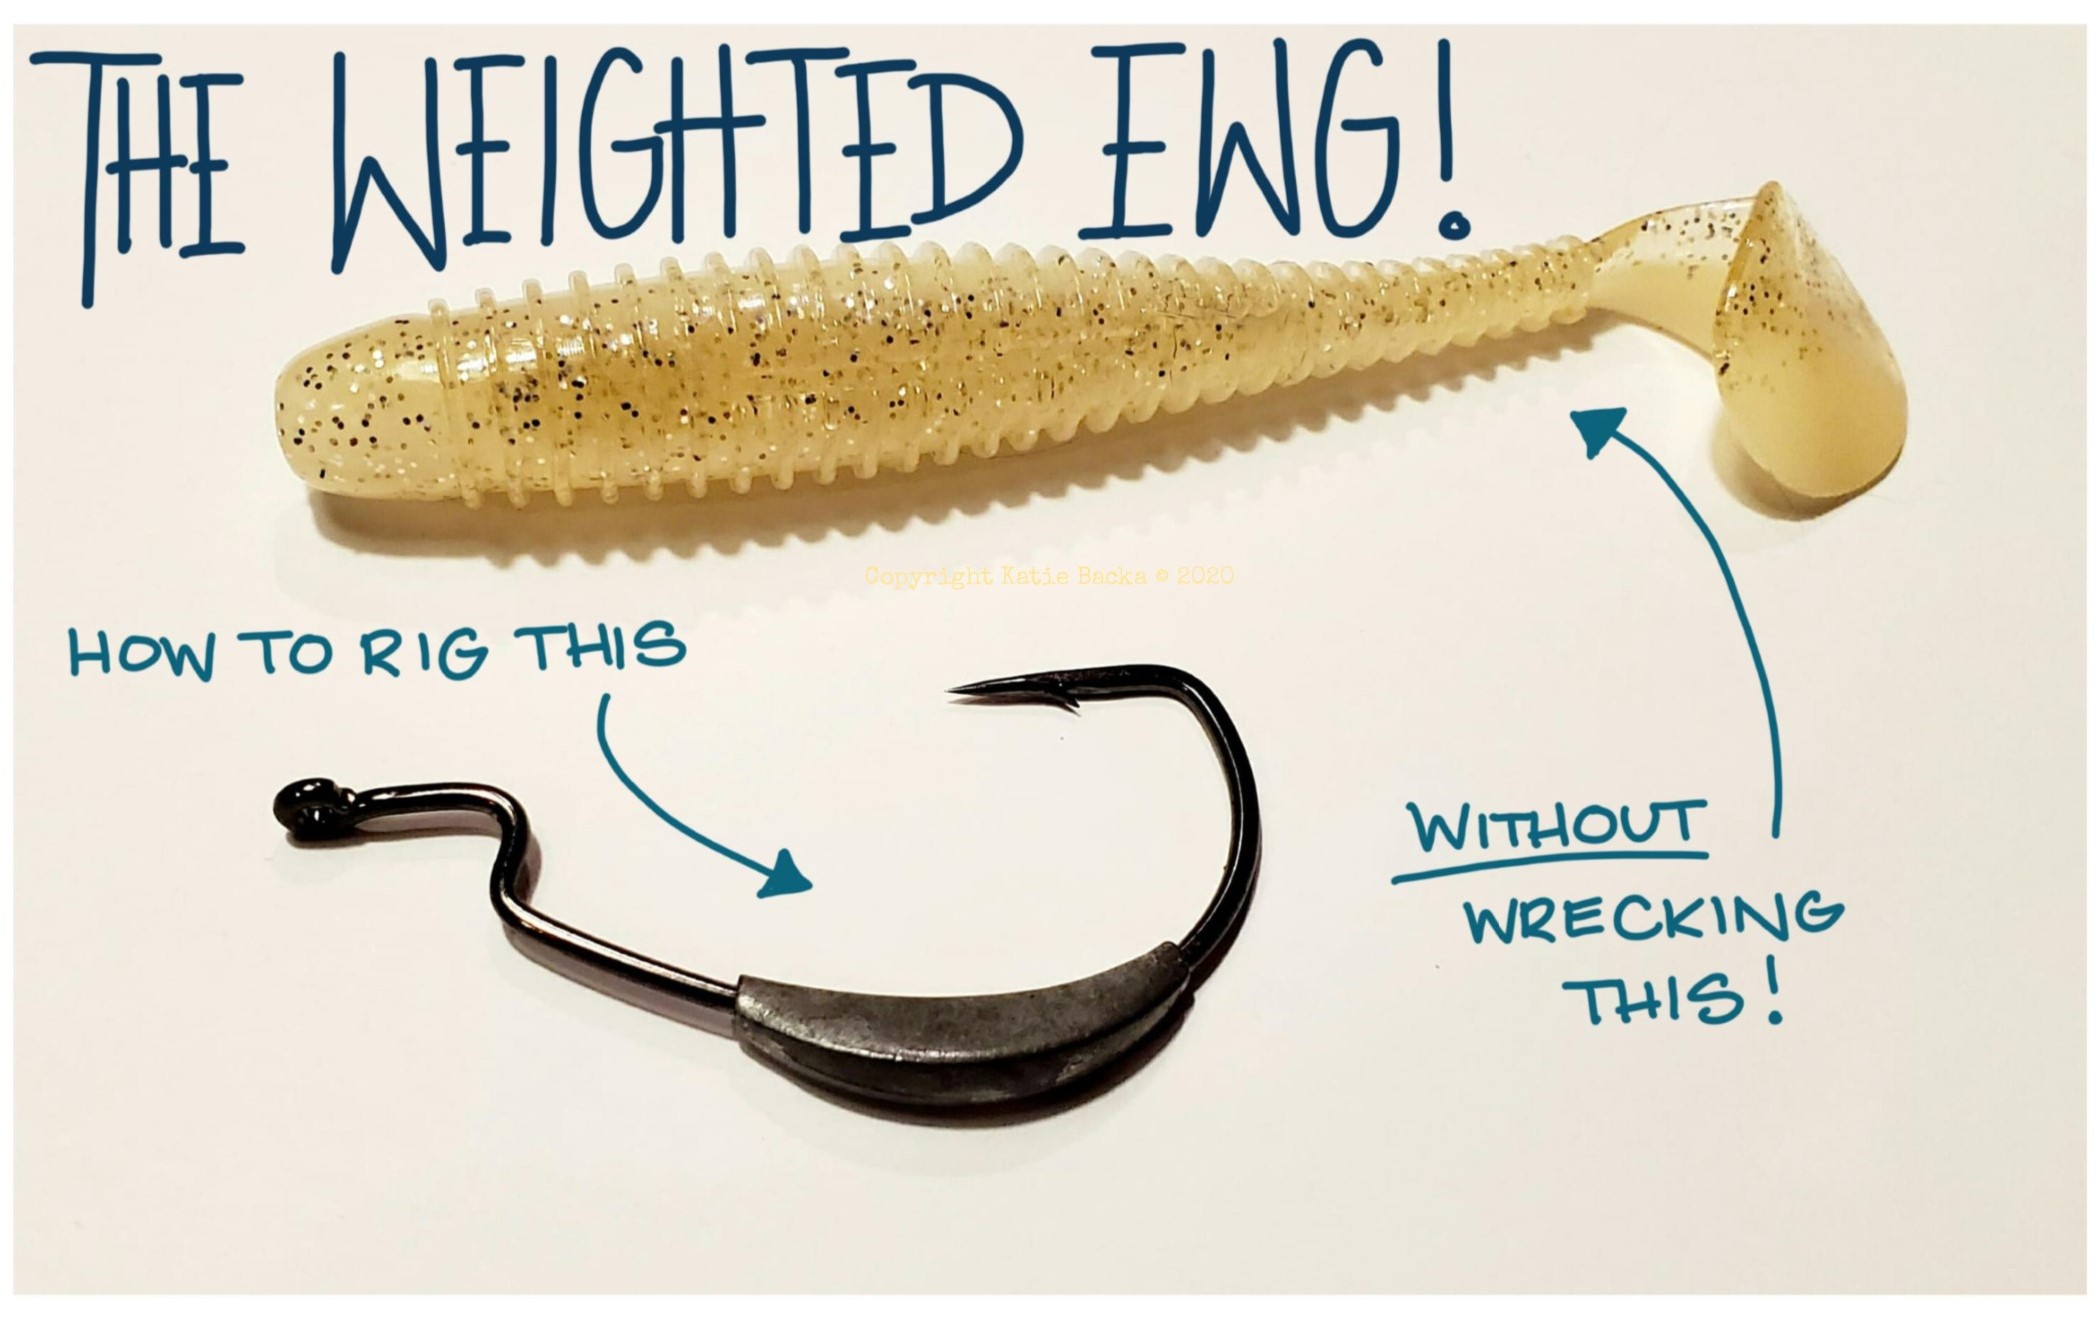 A picture of a weighted EWG hook with a swimbait next to it